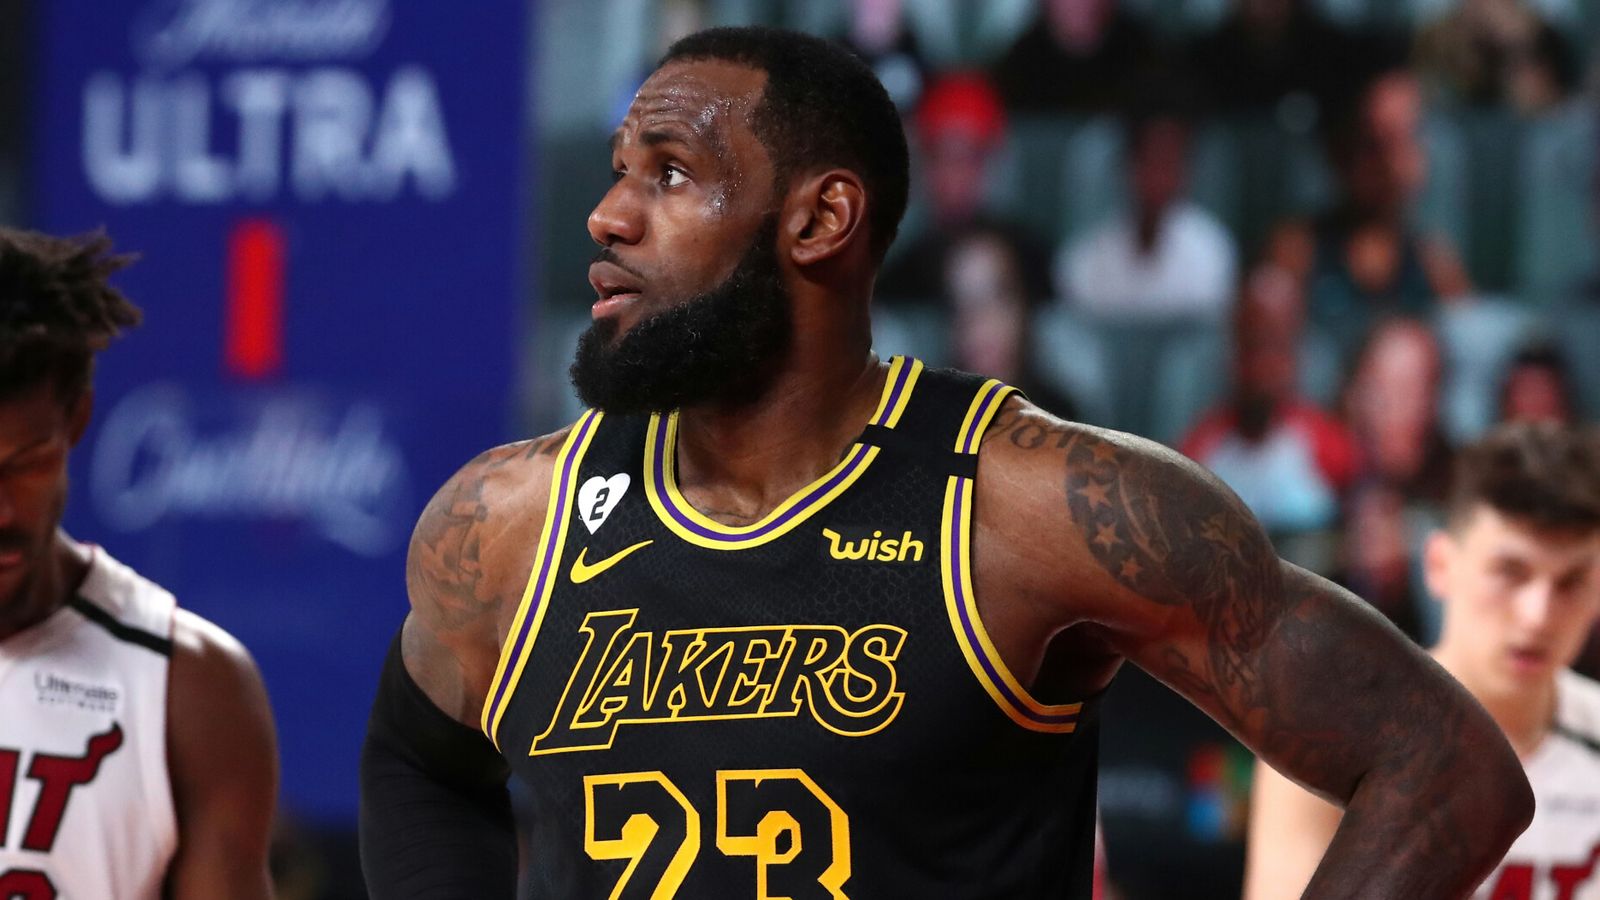 Lakers News: LeBron James' No. 6 Jerseys Are Here. - All Lakers